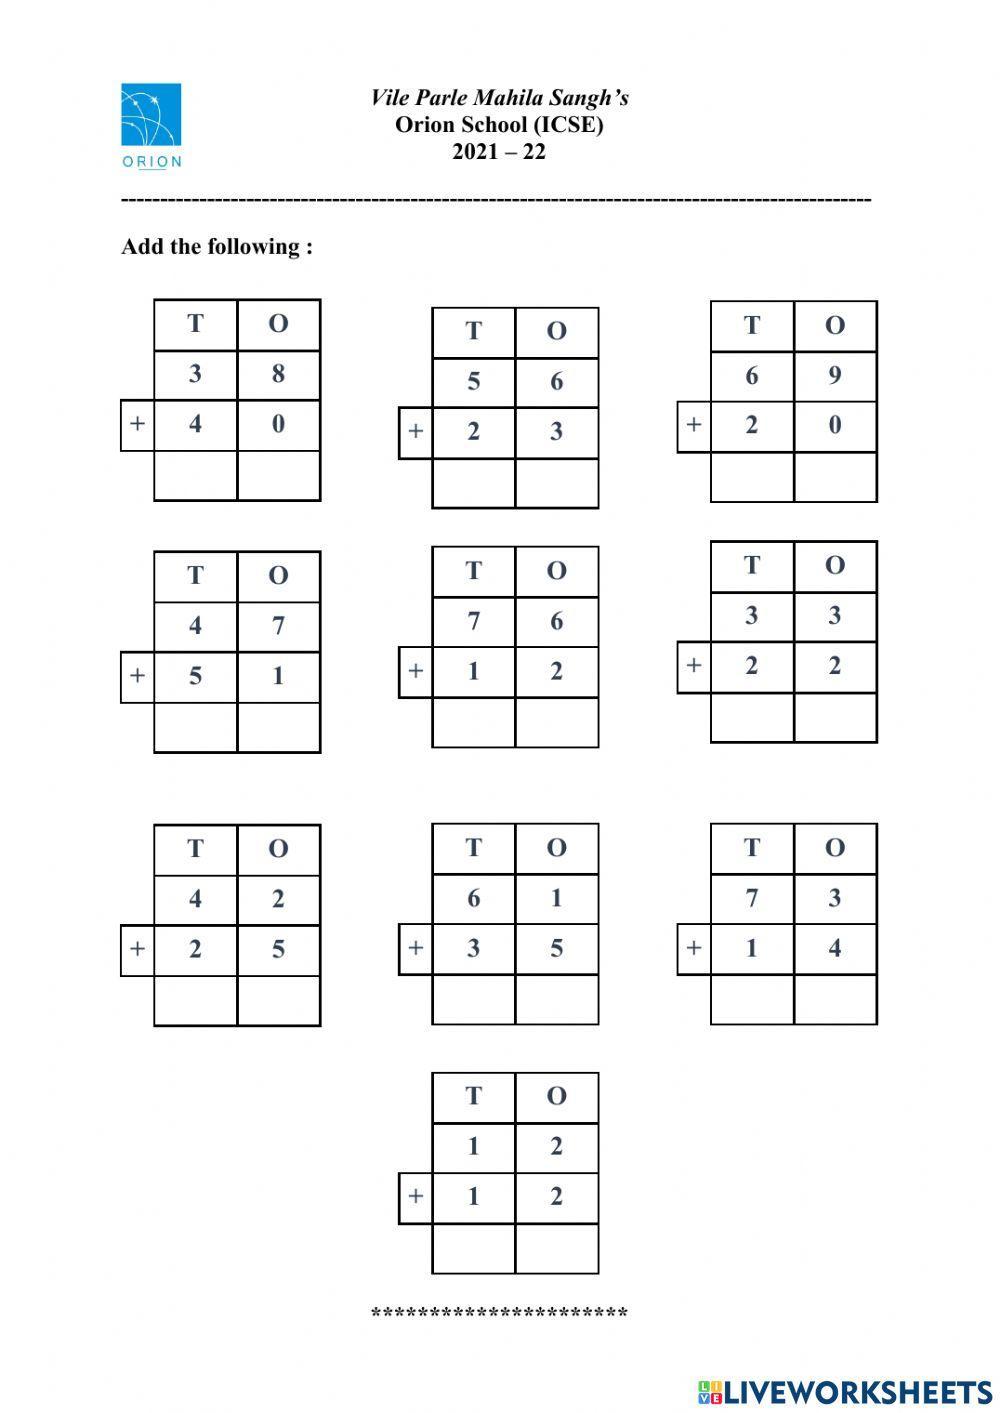 Addition of 2 digit numbers without regrouping